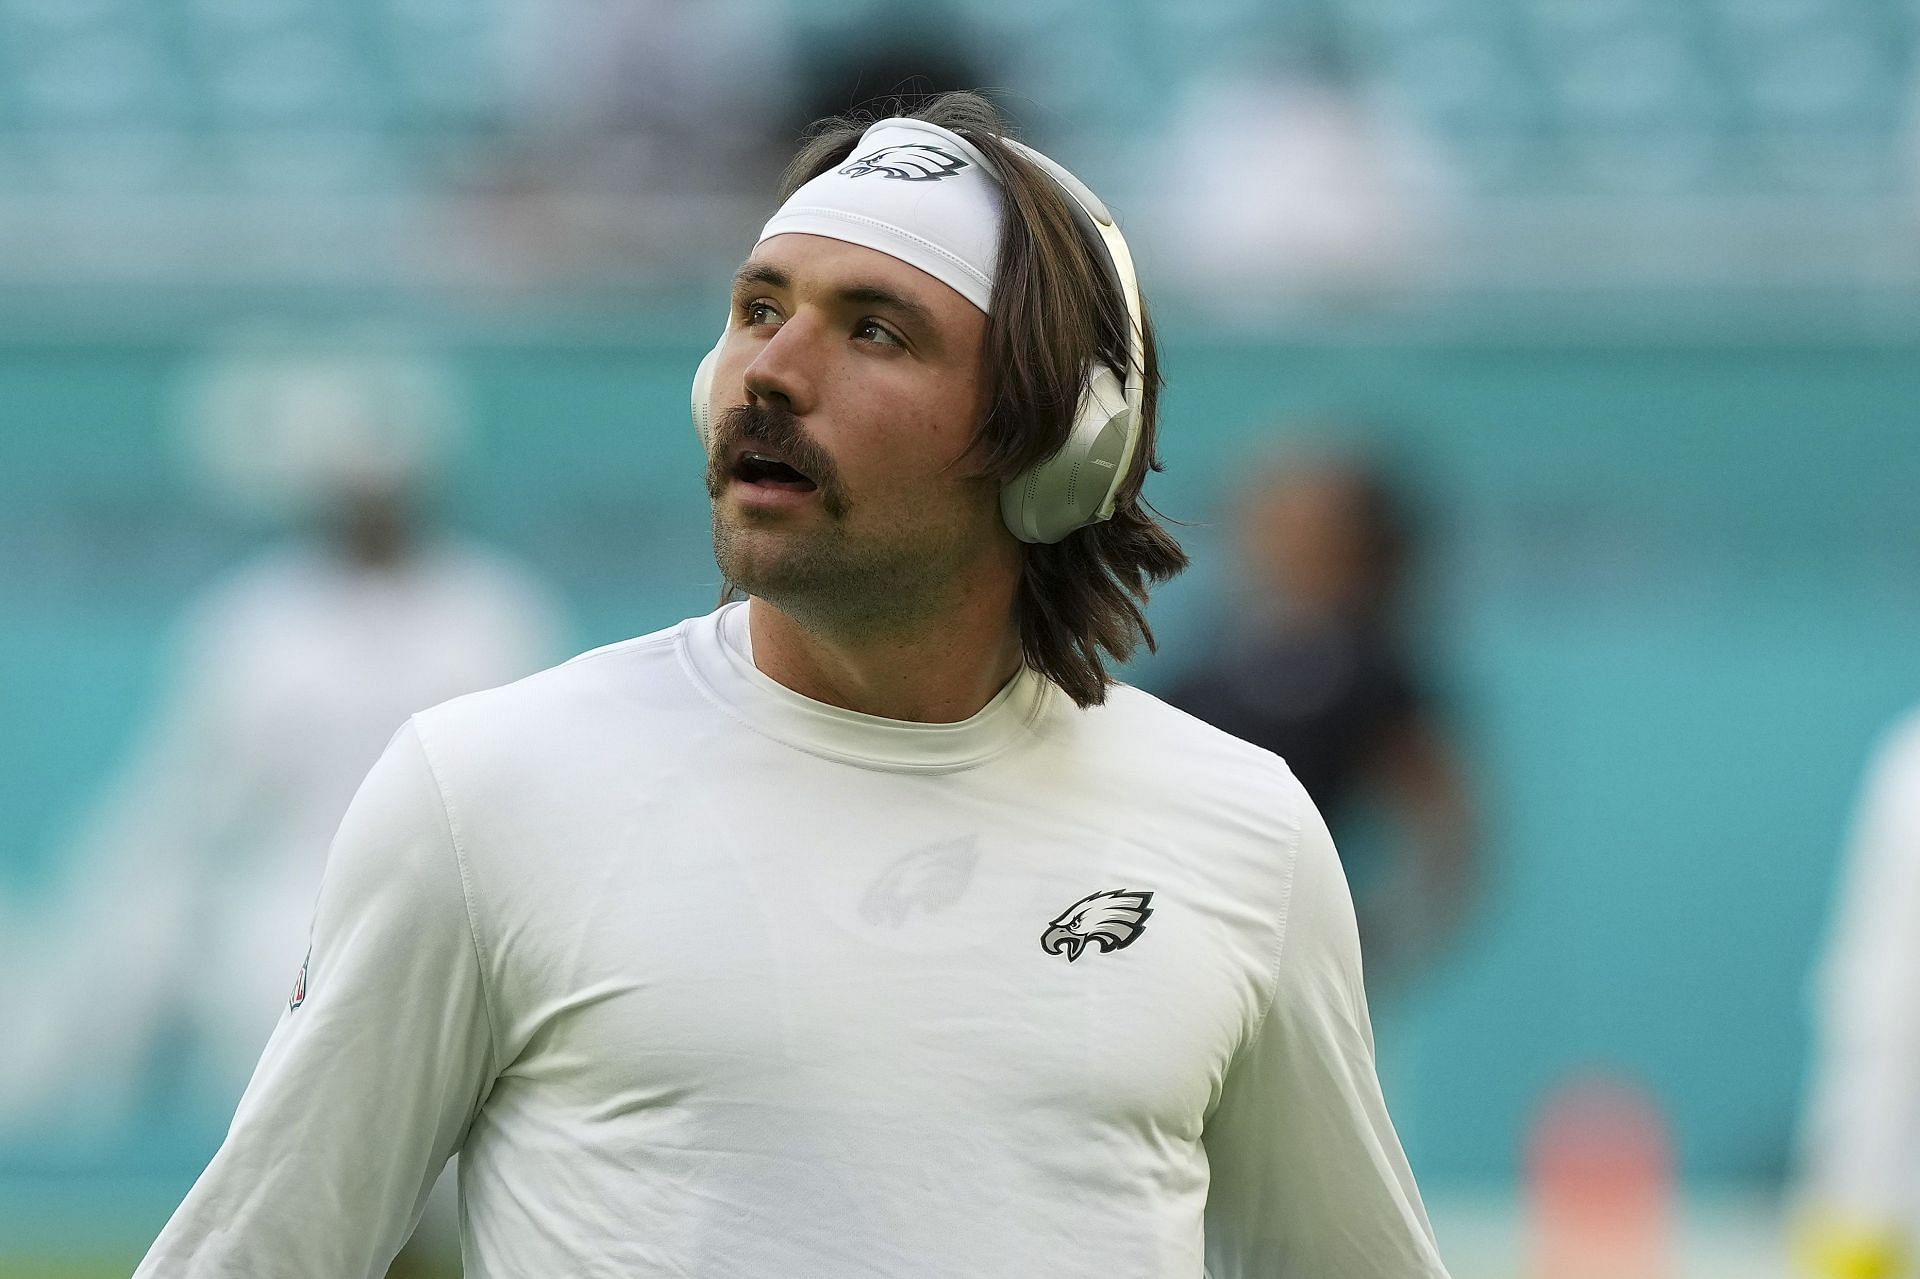 Gardner Minshew of the Philadelphia Eagles during warmups before the start of the game against the Miami Dolphins